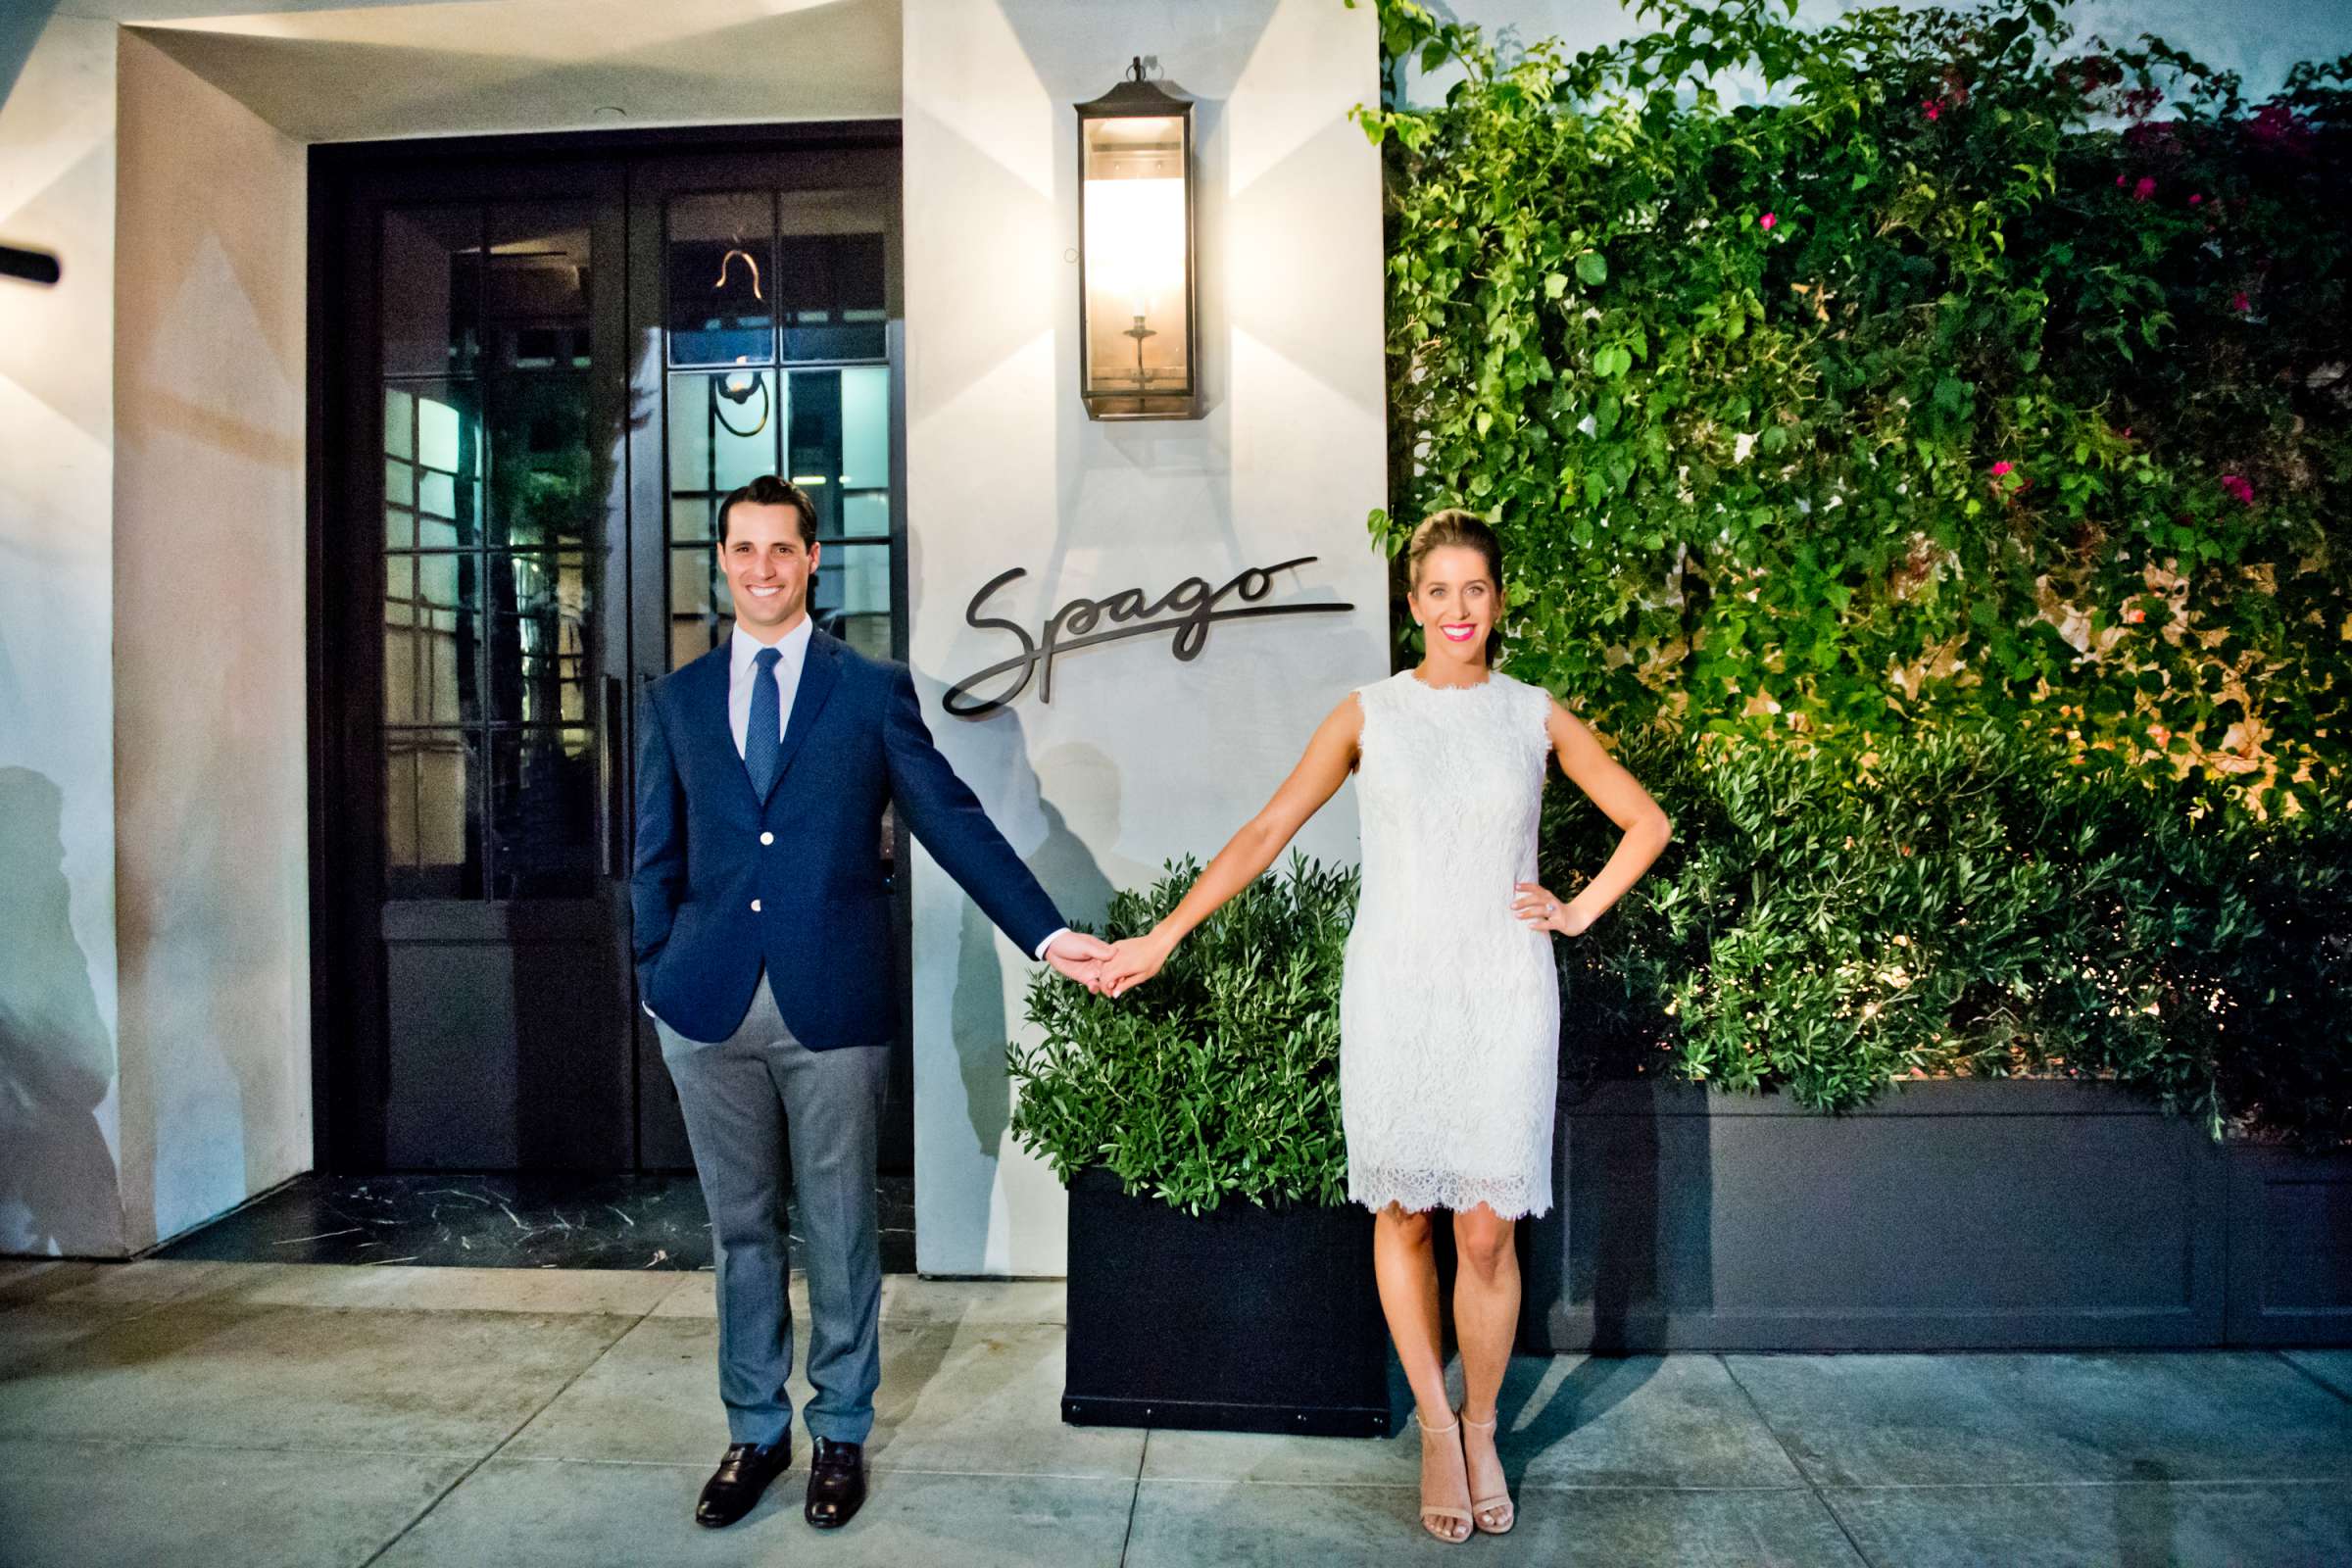 Spago Wedding coordinated by Pryor Events, A Fun Day One Wedding Photo #2 by True Photography